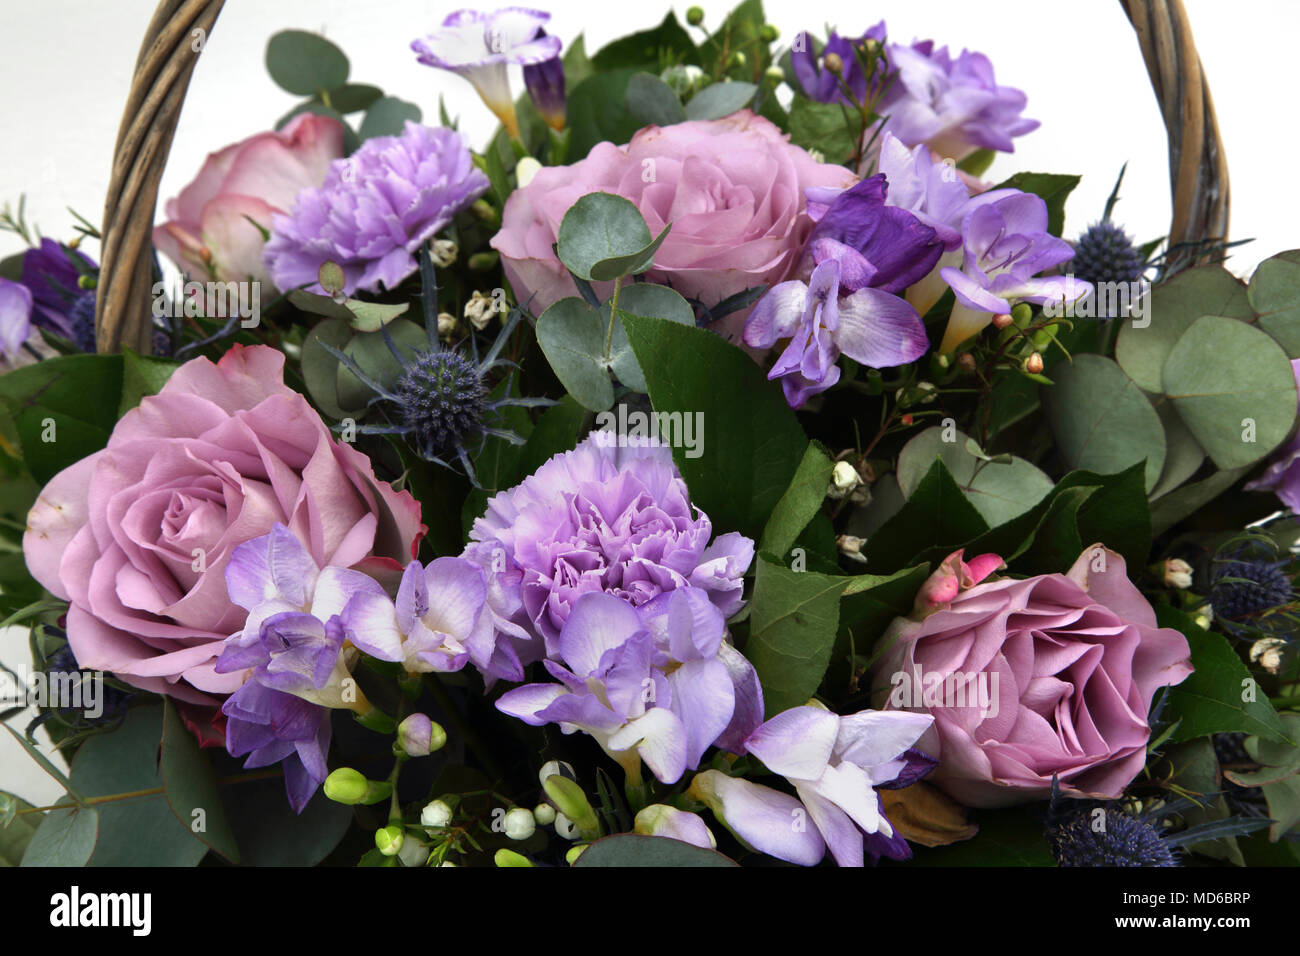 Bouquet of Flowers Mauve Roses And Freesias with Sea Holly in Basket Stock Photo